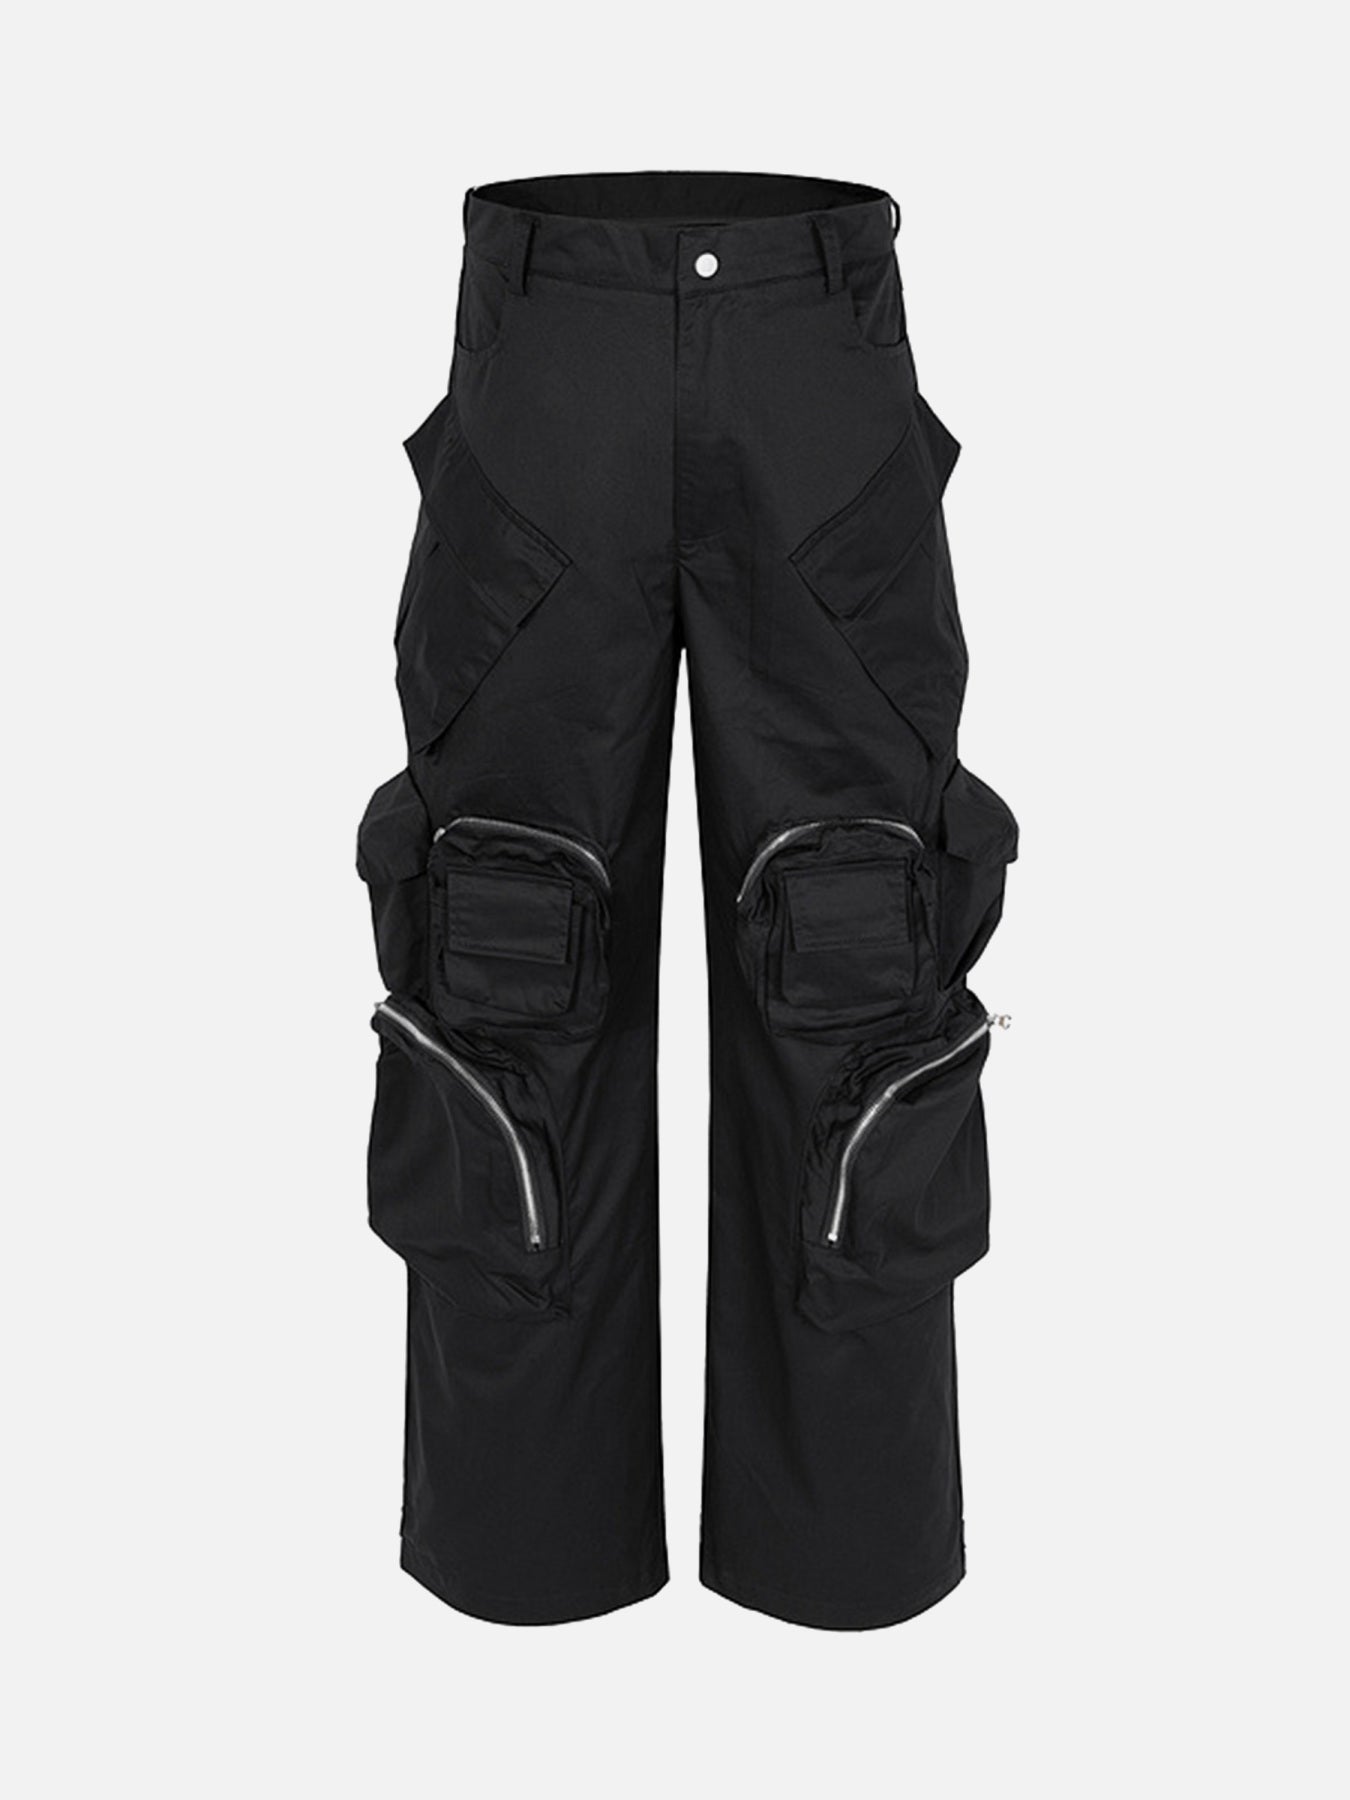 The Supermade Multi-Pocket Functional Casual Workwear Wide Leg Pants - 1643